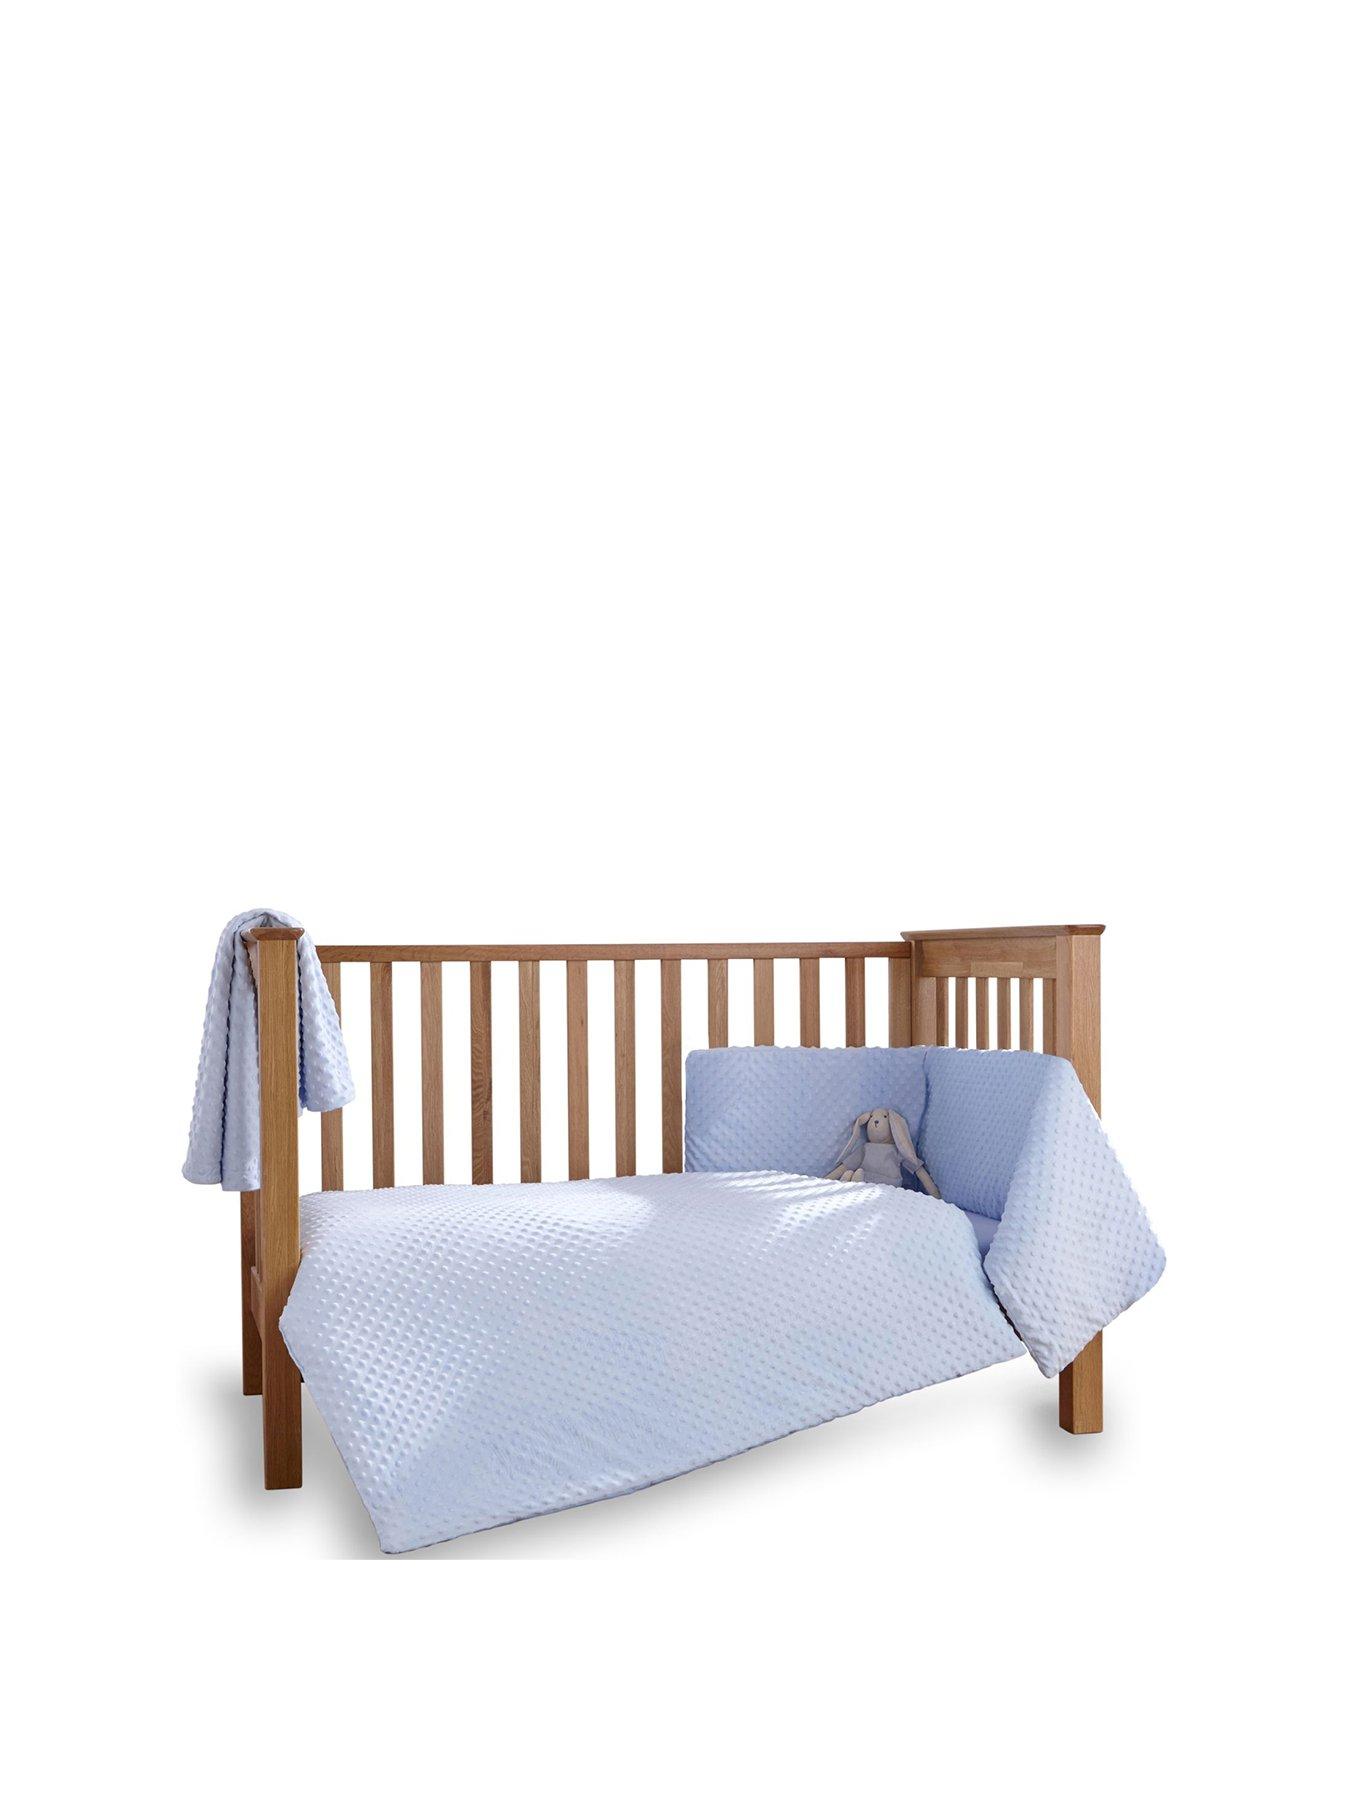 Cot Bumper Padded and Fully Breathable 70cm wide, Cream